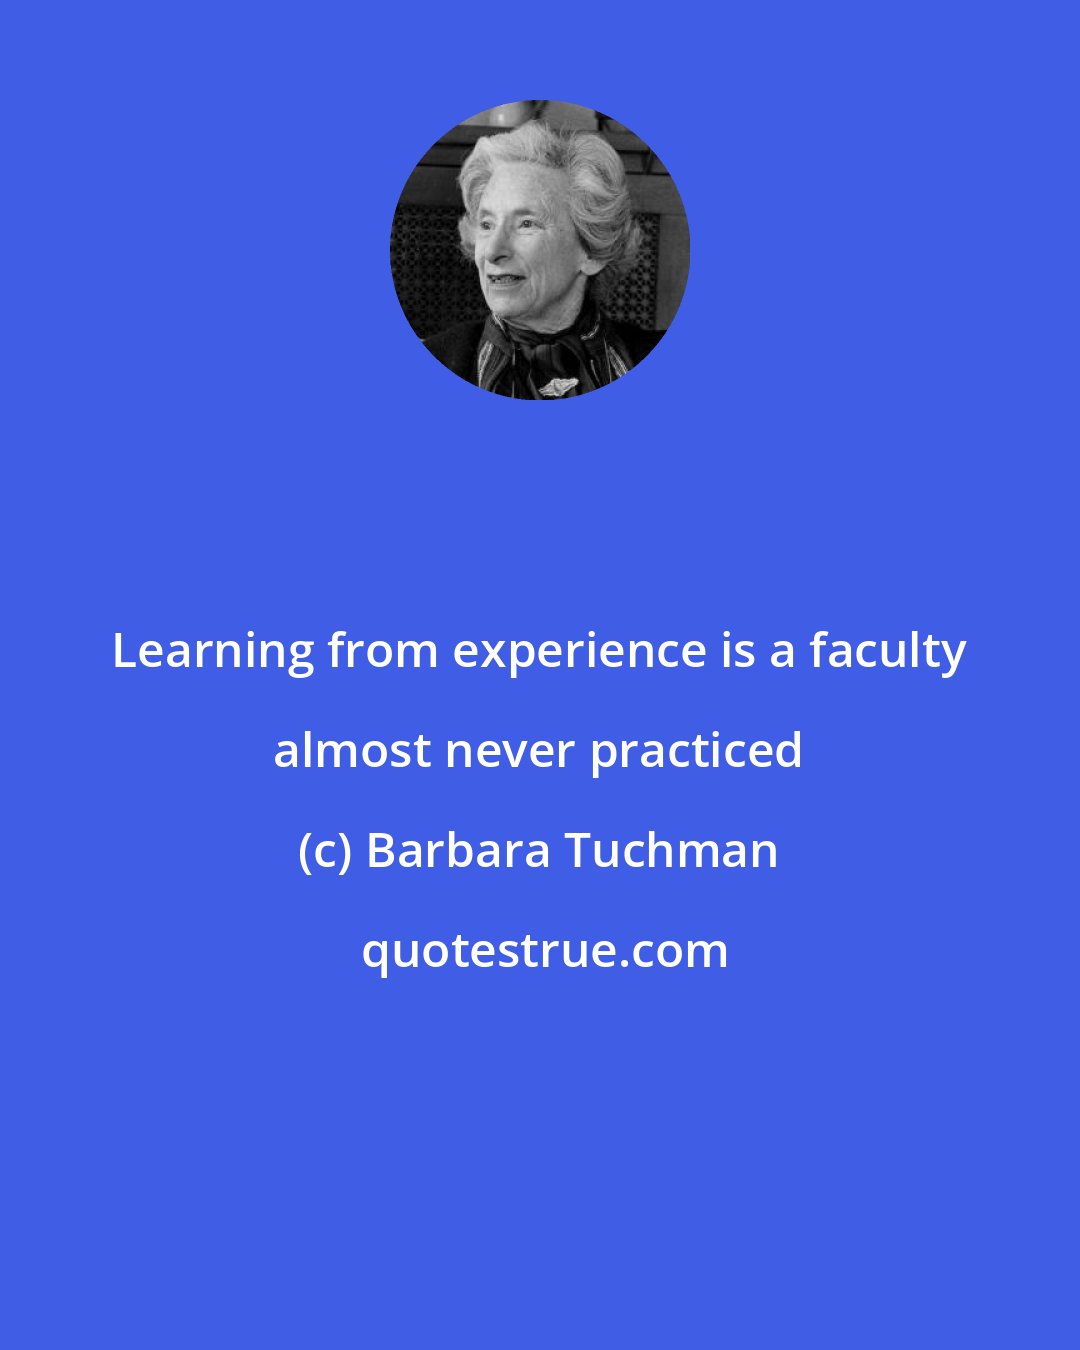 Barbara Tuchman: Learning from experience is a faculty almost never practiced